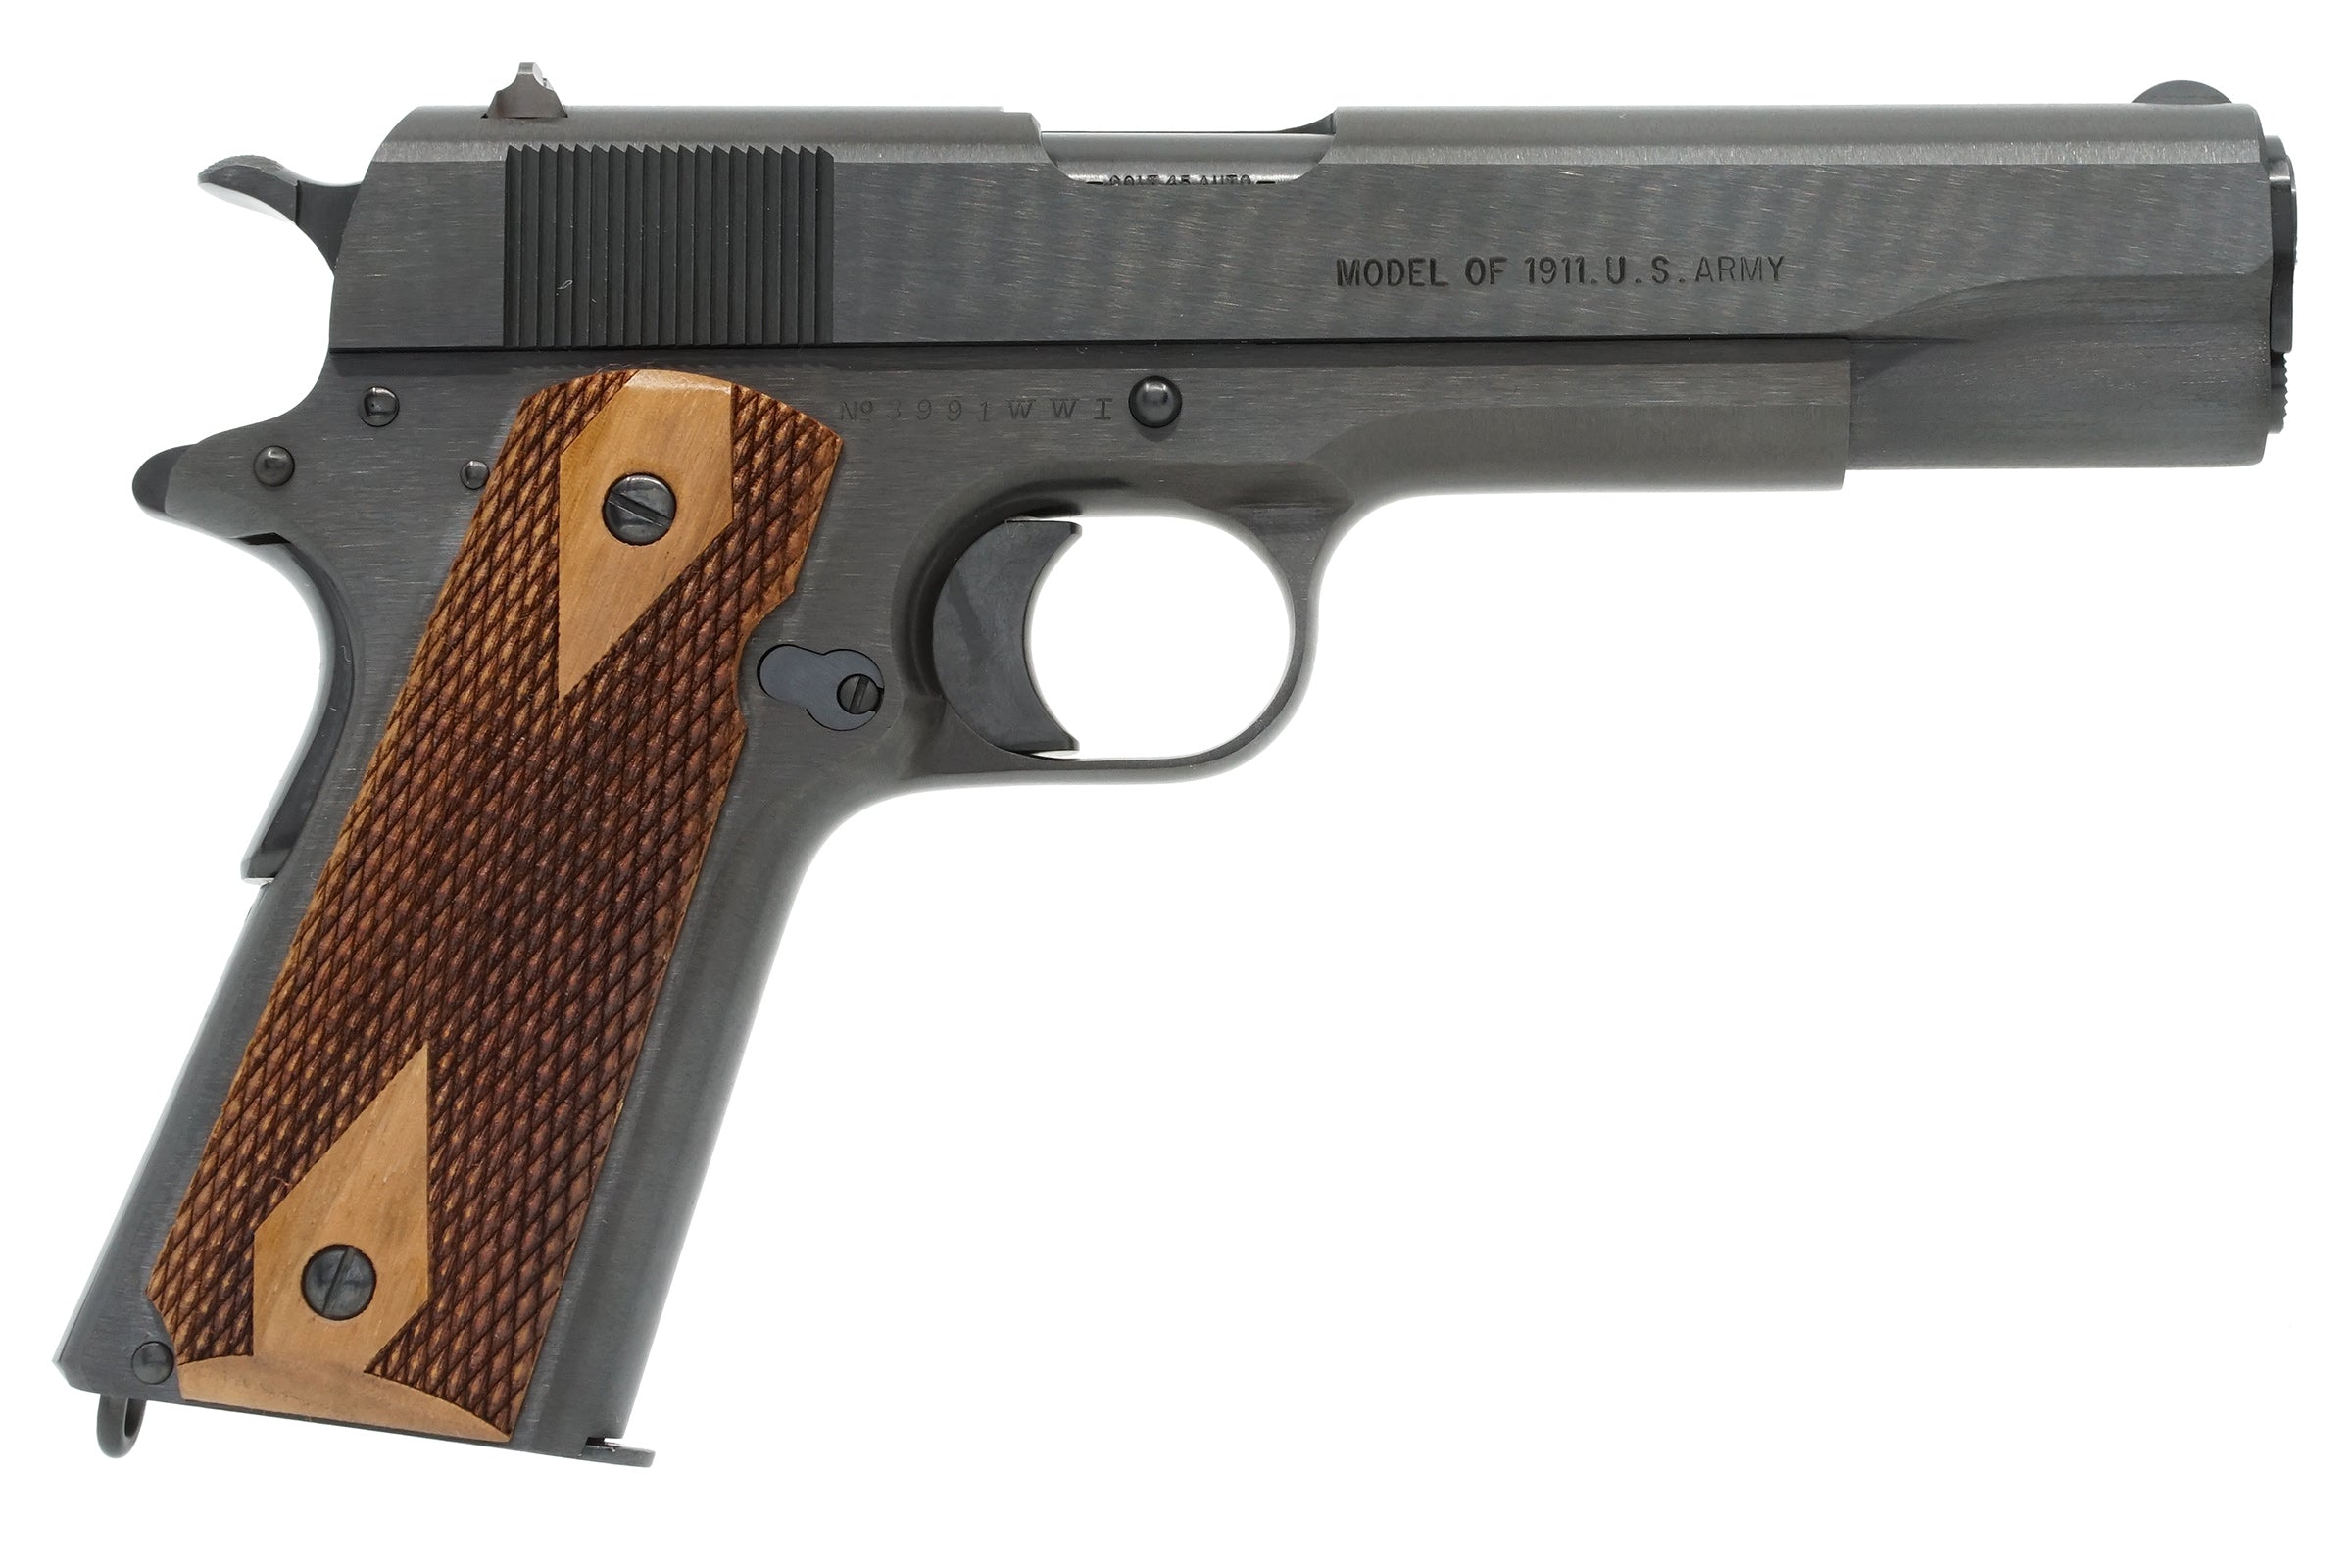 Colt M1911 45ACP SN:3991WWI MFG:2003 - WWI Reproduction - Old Colt